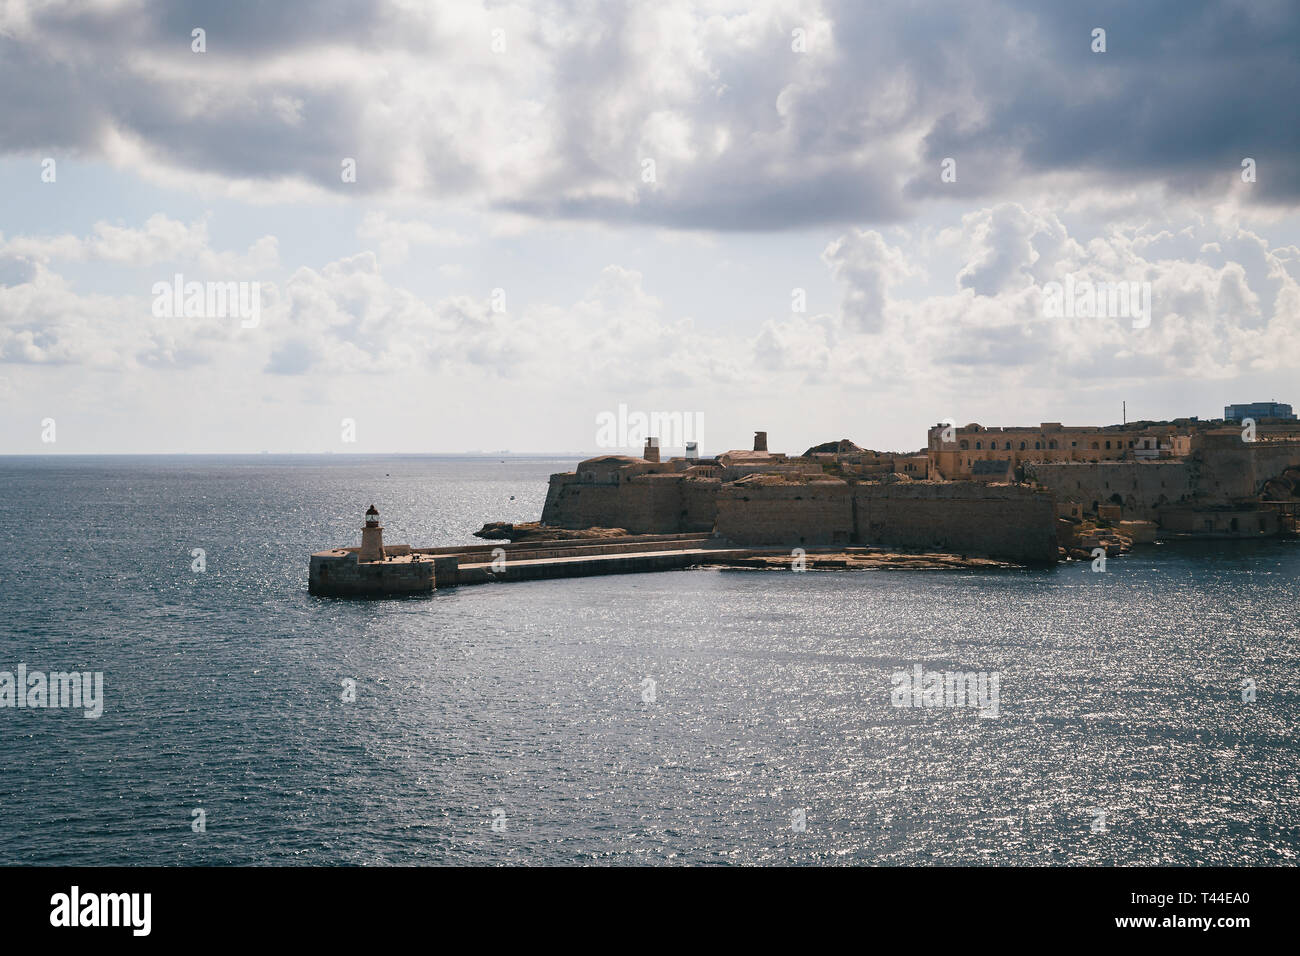 View of the Grand Harbour entrance and old medieval Ricasoli East Breakwater with red lighthouse and Fort Ricasoli seen from Valletta, Malta Stock Photo